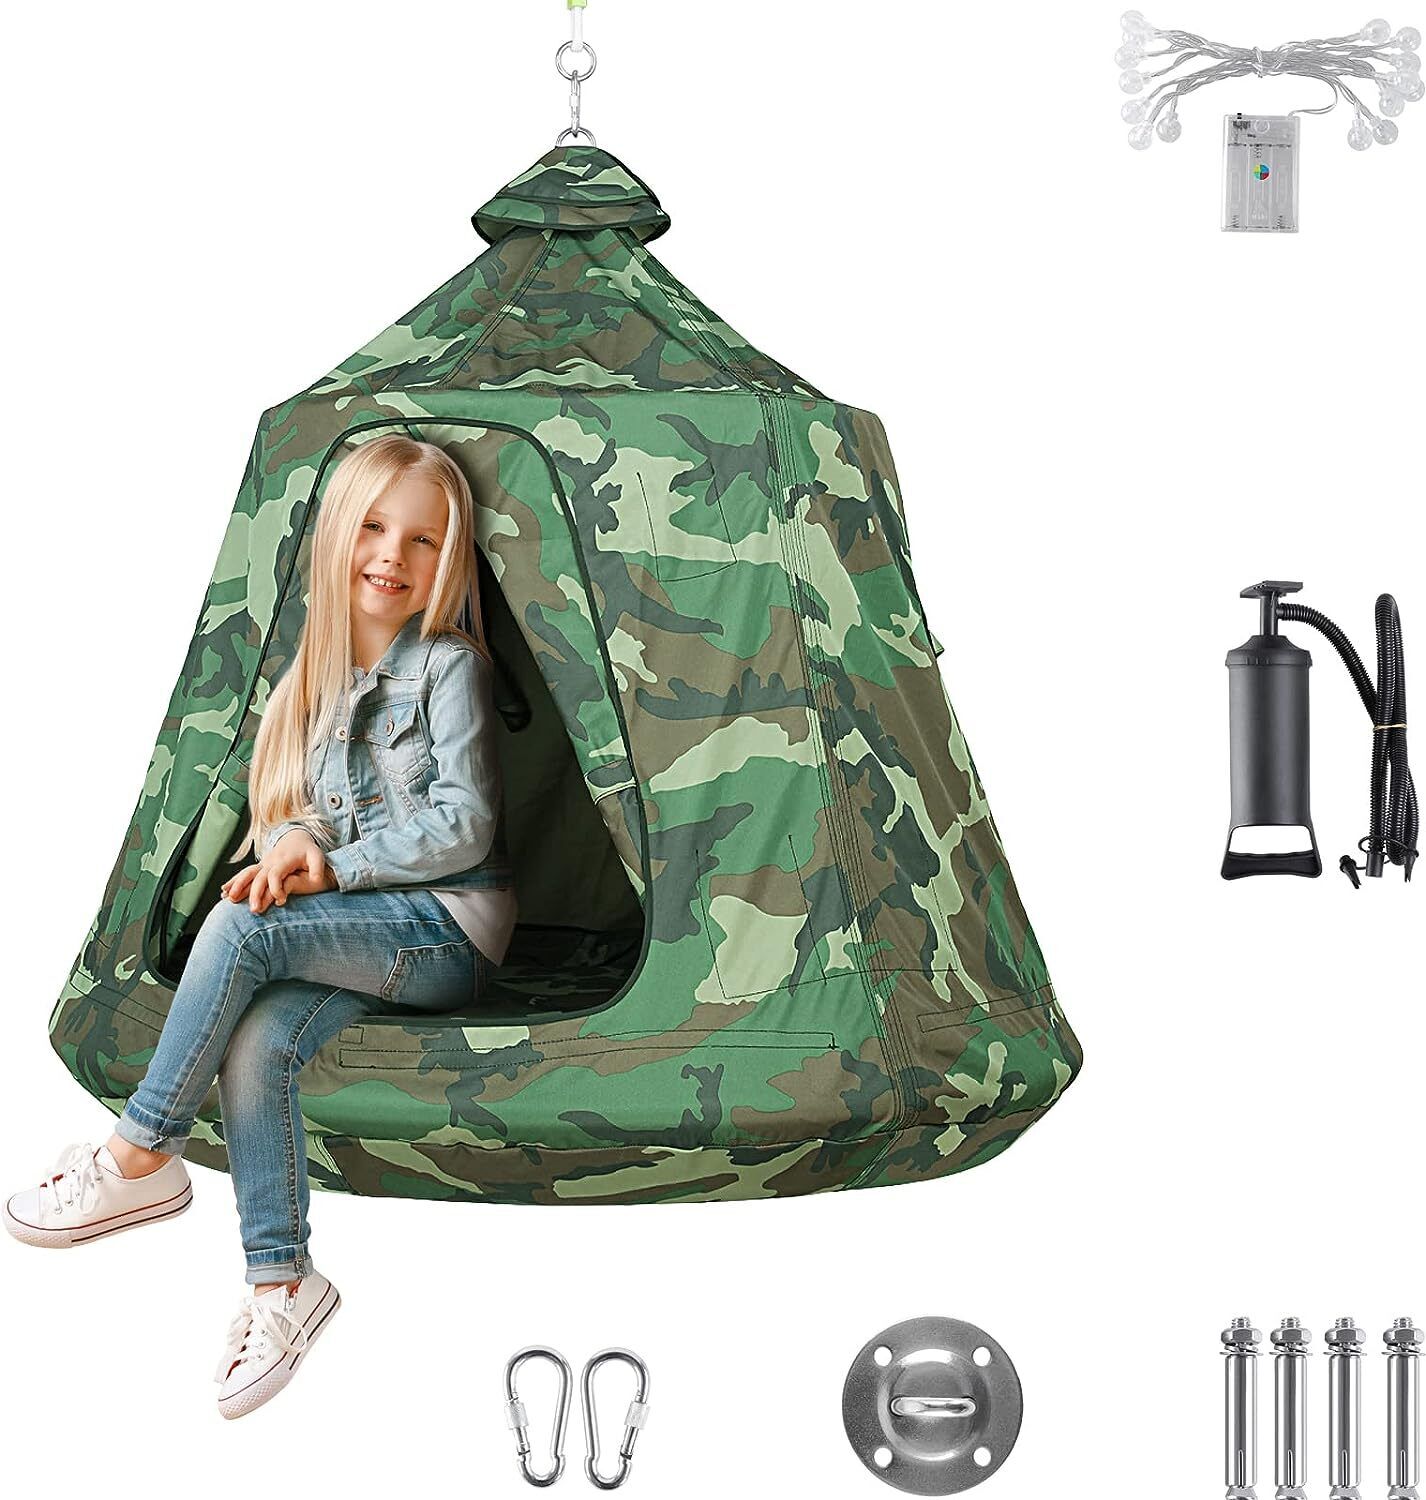 Arlopu Hanging Tree Tent for Kids, Indoor Outdoor Swing Tent Children Play House Tent with LED Lights